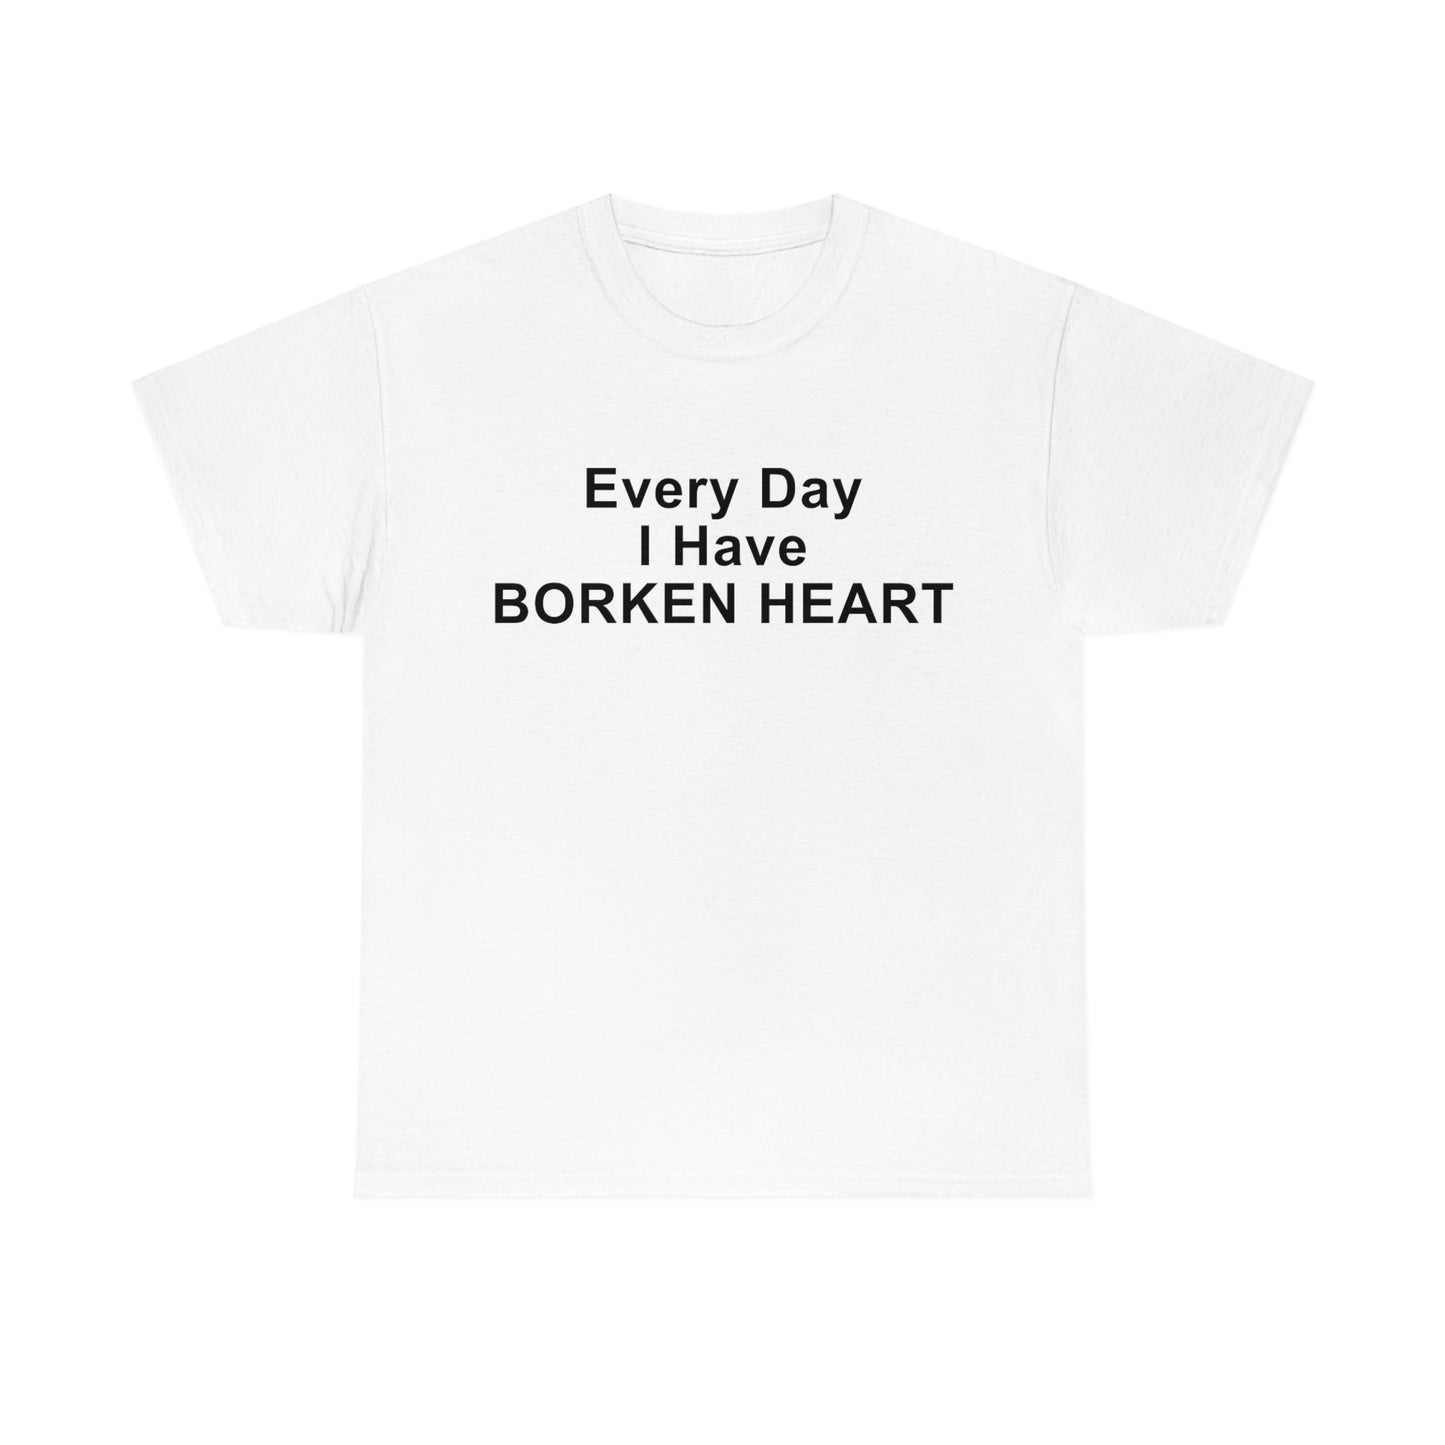 Every Day I Have Borken Heart.